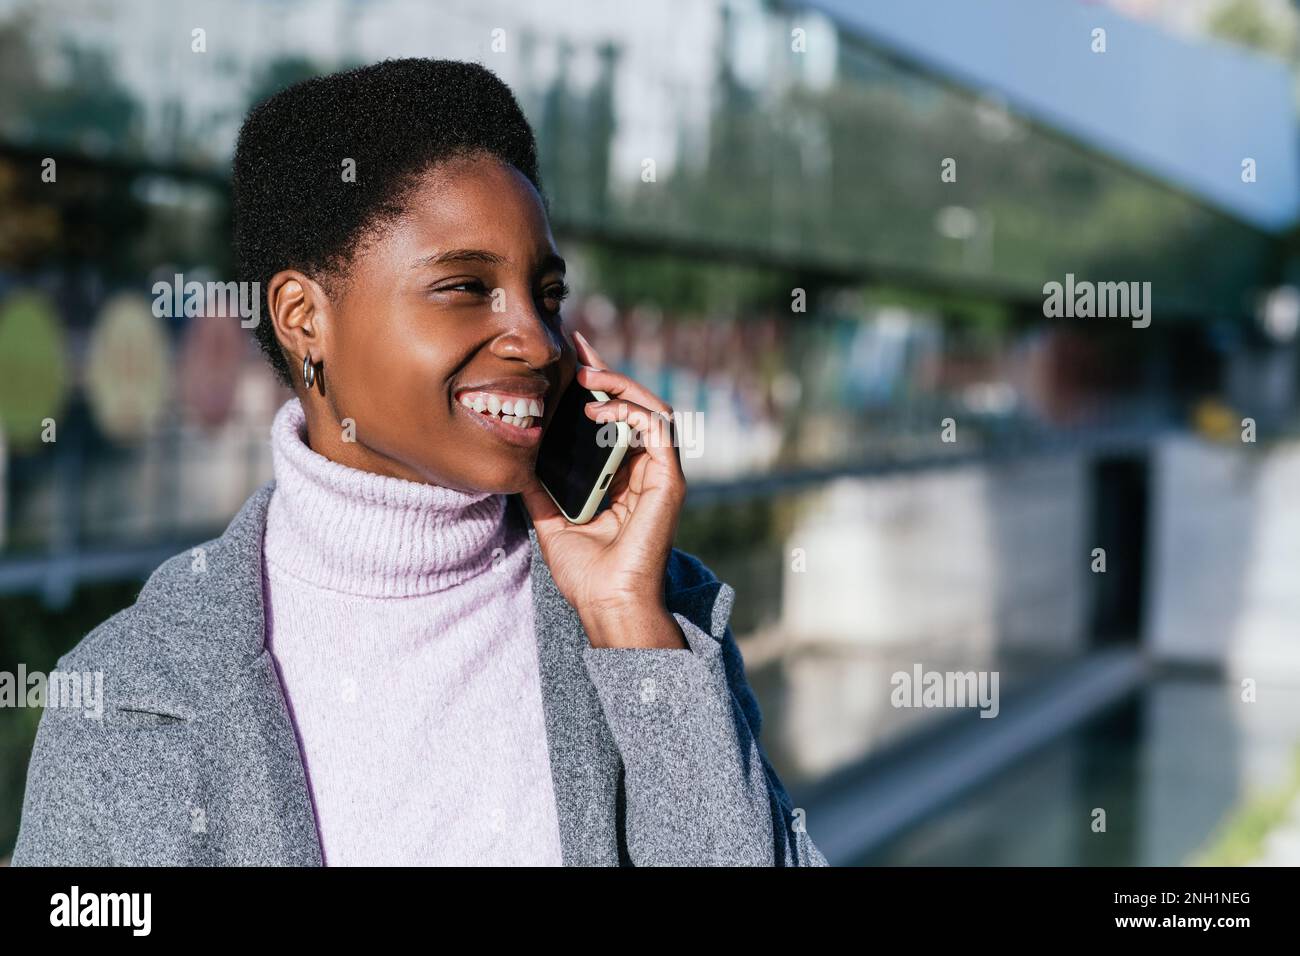 Cheerful African American female in stylish outerwear smiling and looking away while answering phone call on blurred background of city street Stock Photo